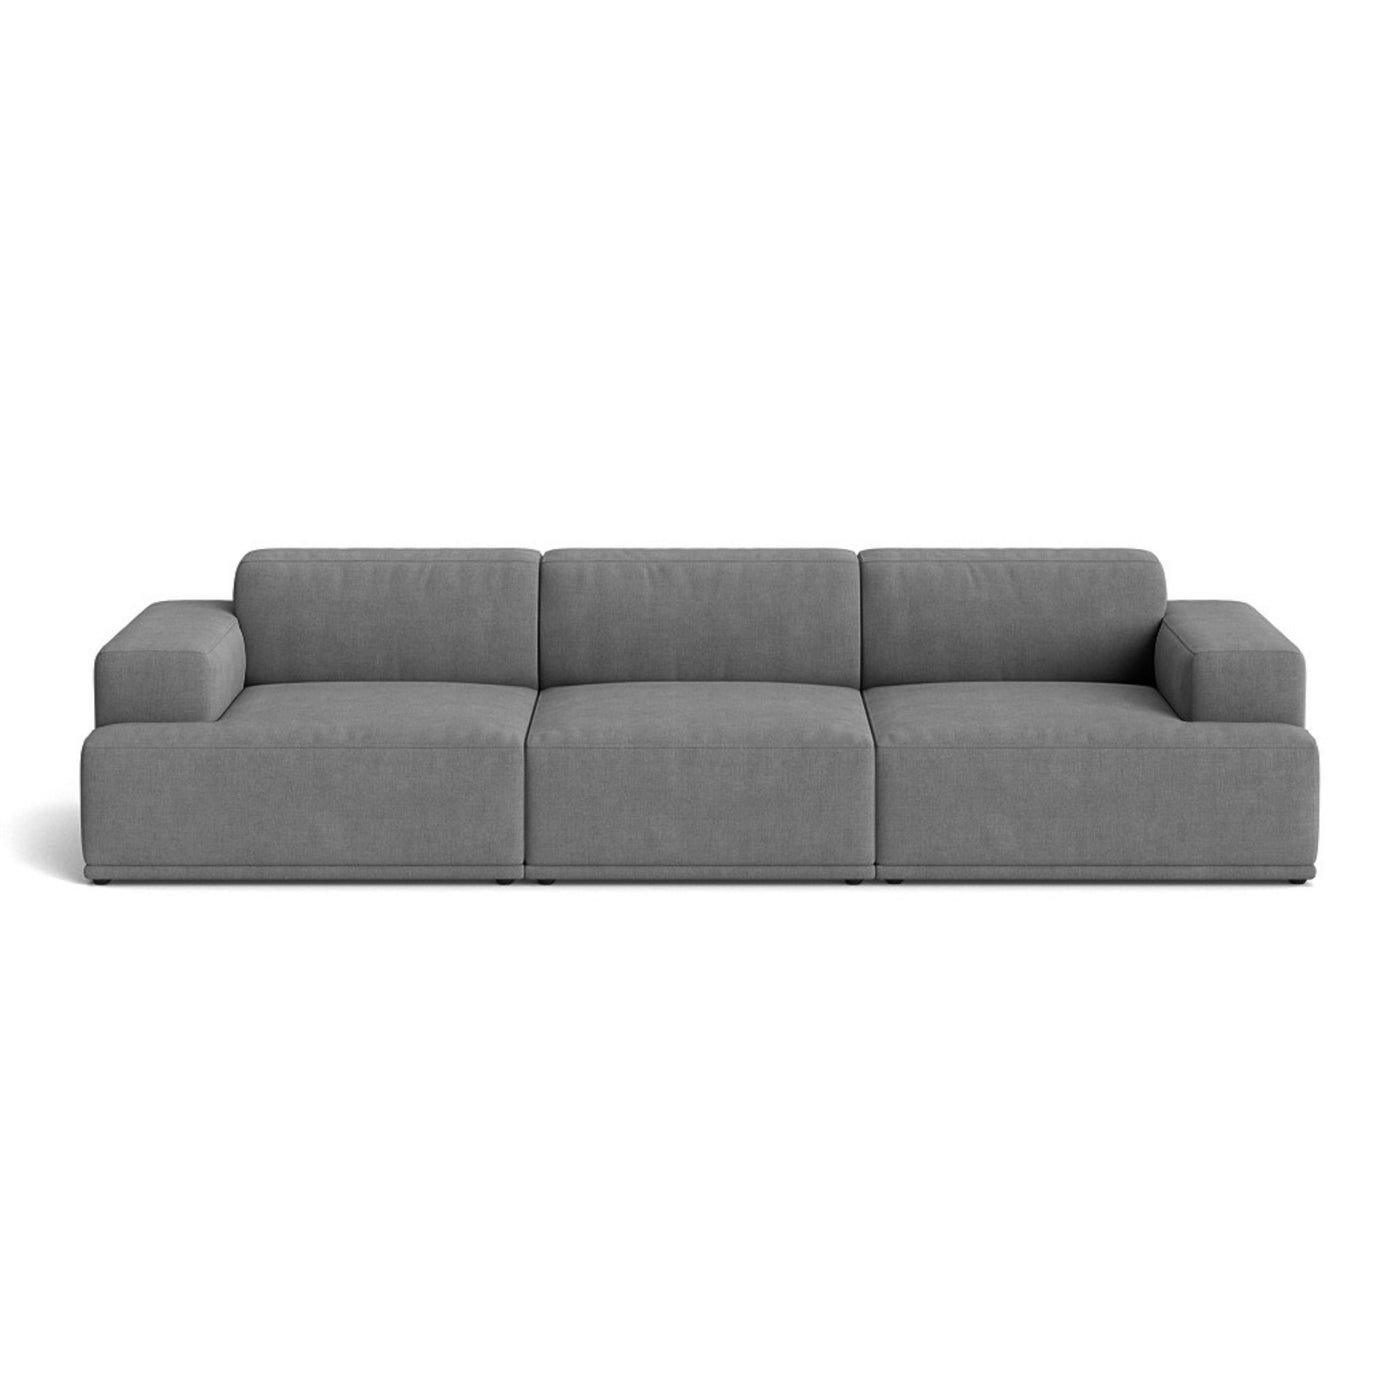 Muuto Connect Soft Modular 3 Seater Sofa, configuration 1. Made-to-order from someday designs. #colour_fiord-171